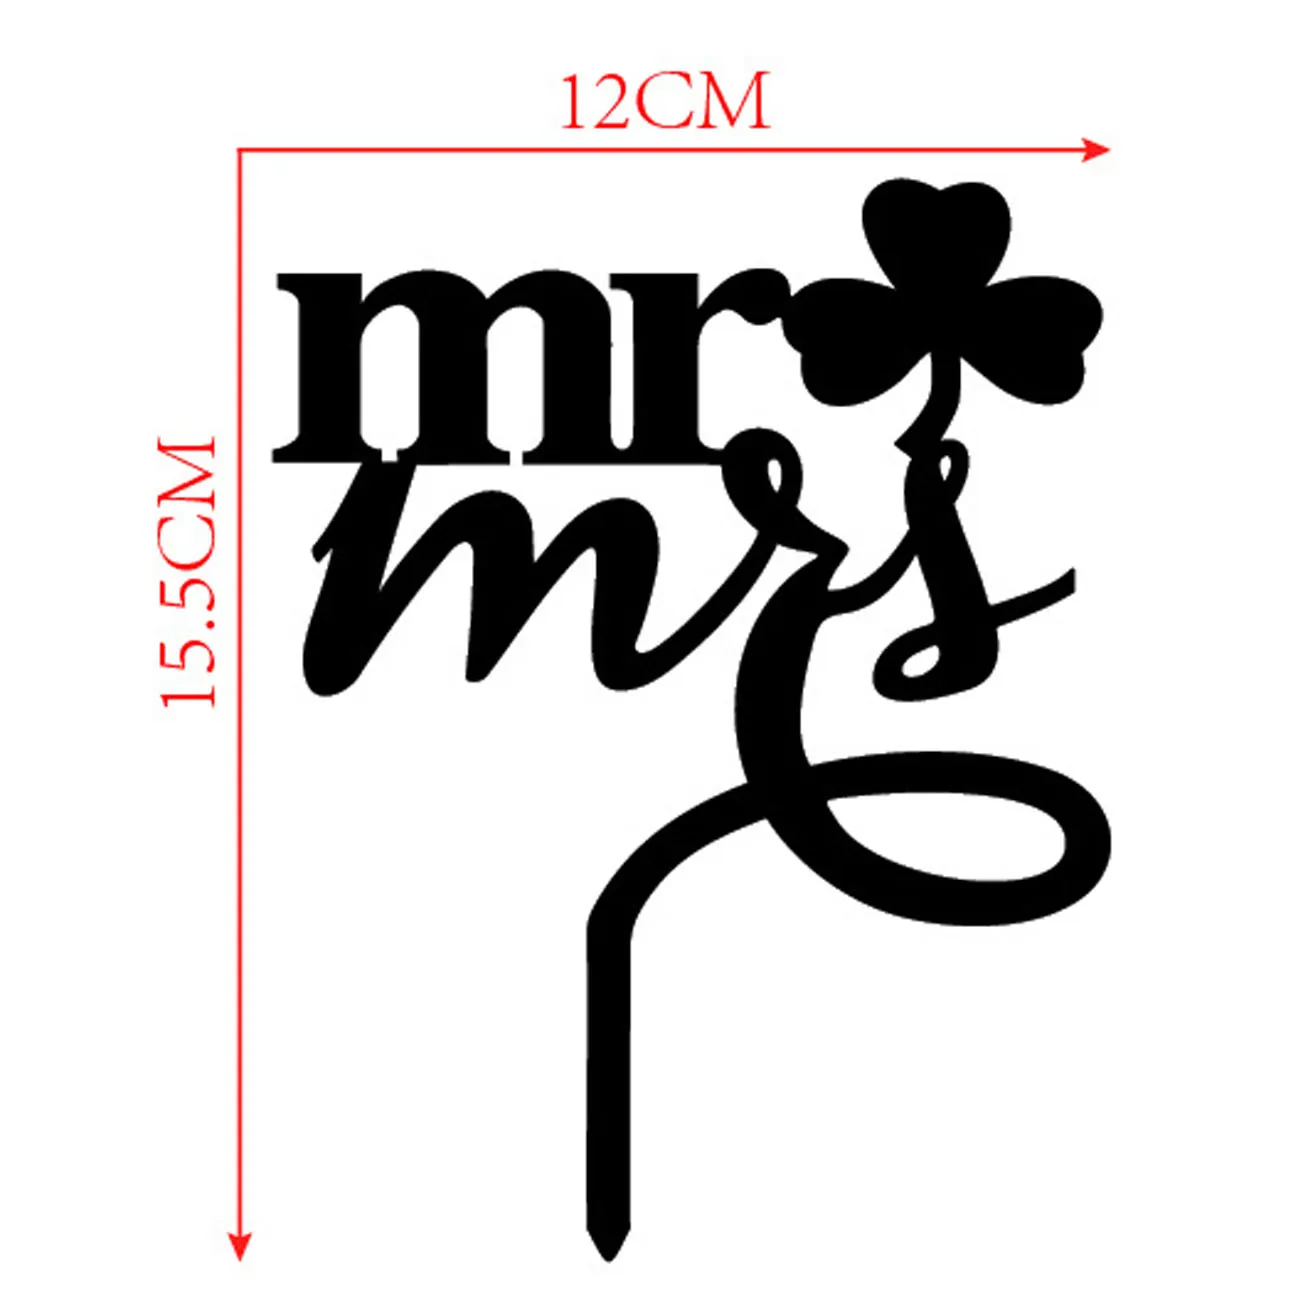 Feis whole arcylic Mr and Mrs words inserted card cake topper wedding decoration cake accessory2918105